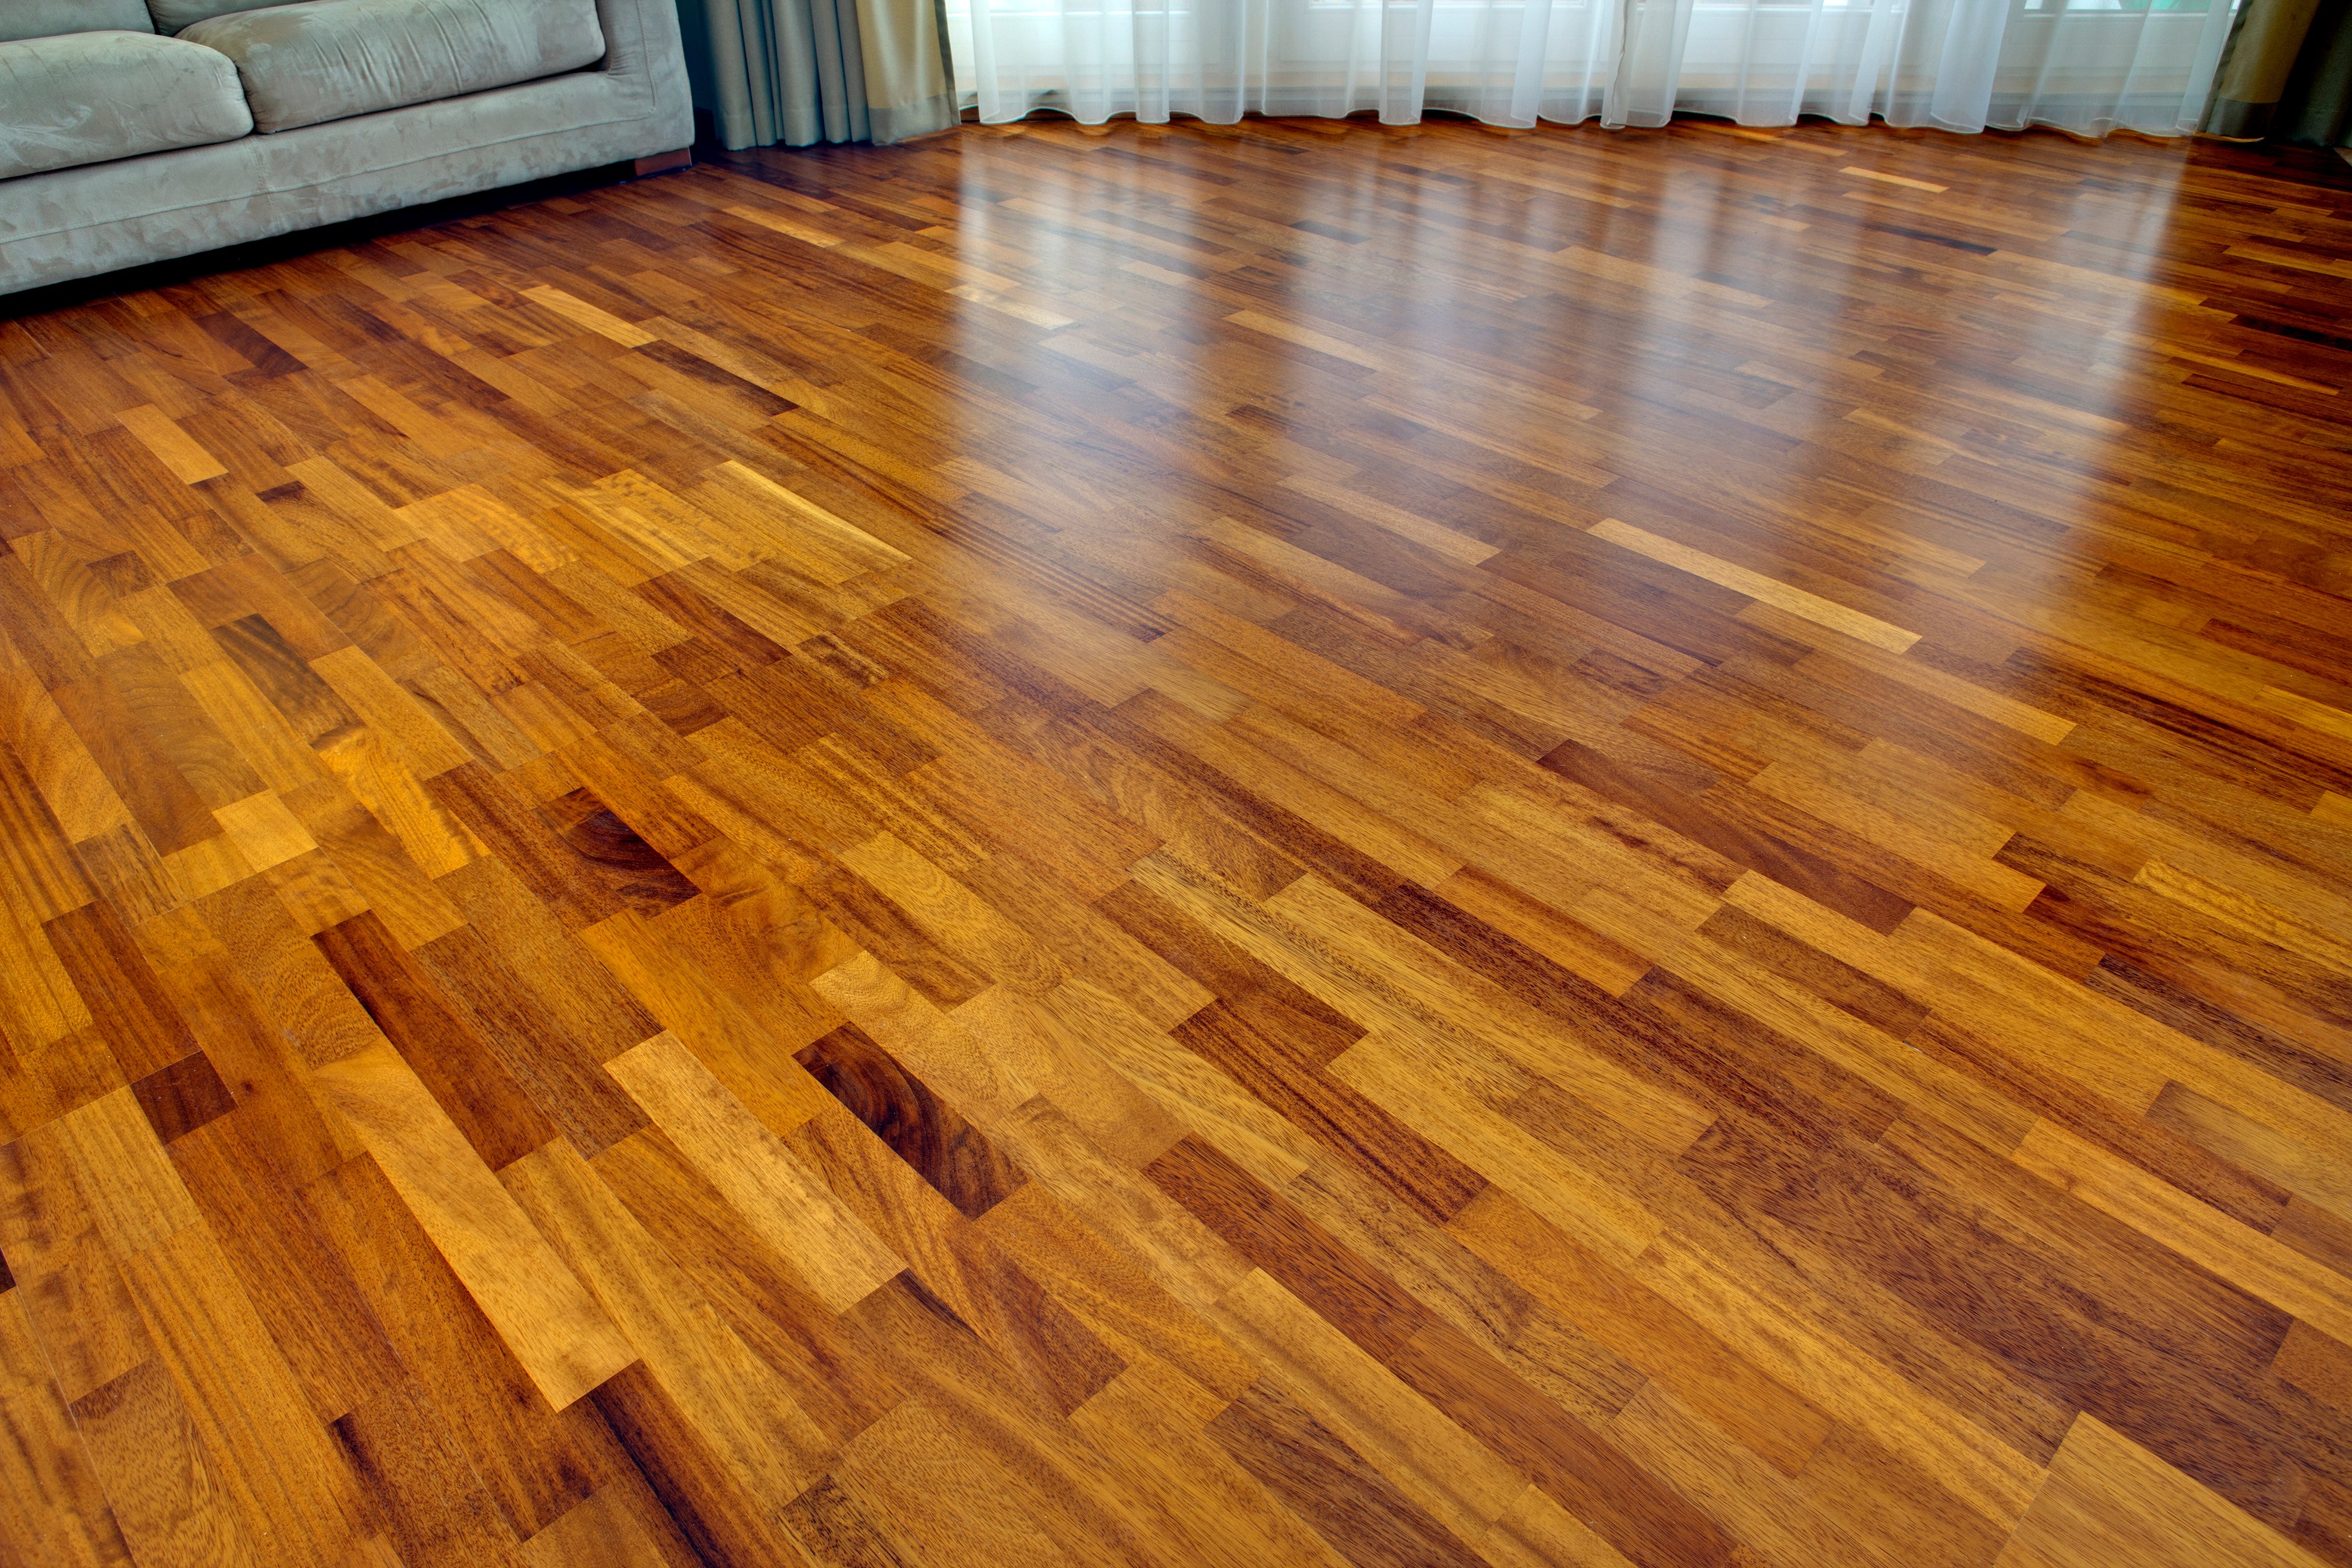 How To Install Hardwood Floors With, Can You Put Heated Floors Under Engineered Hardwood